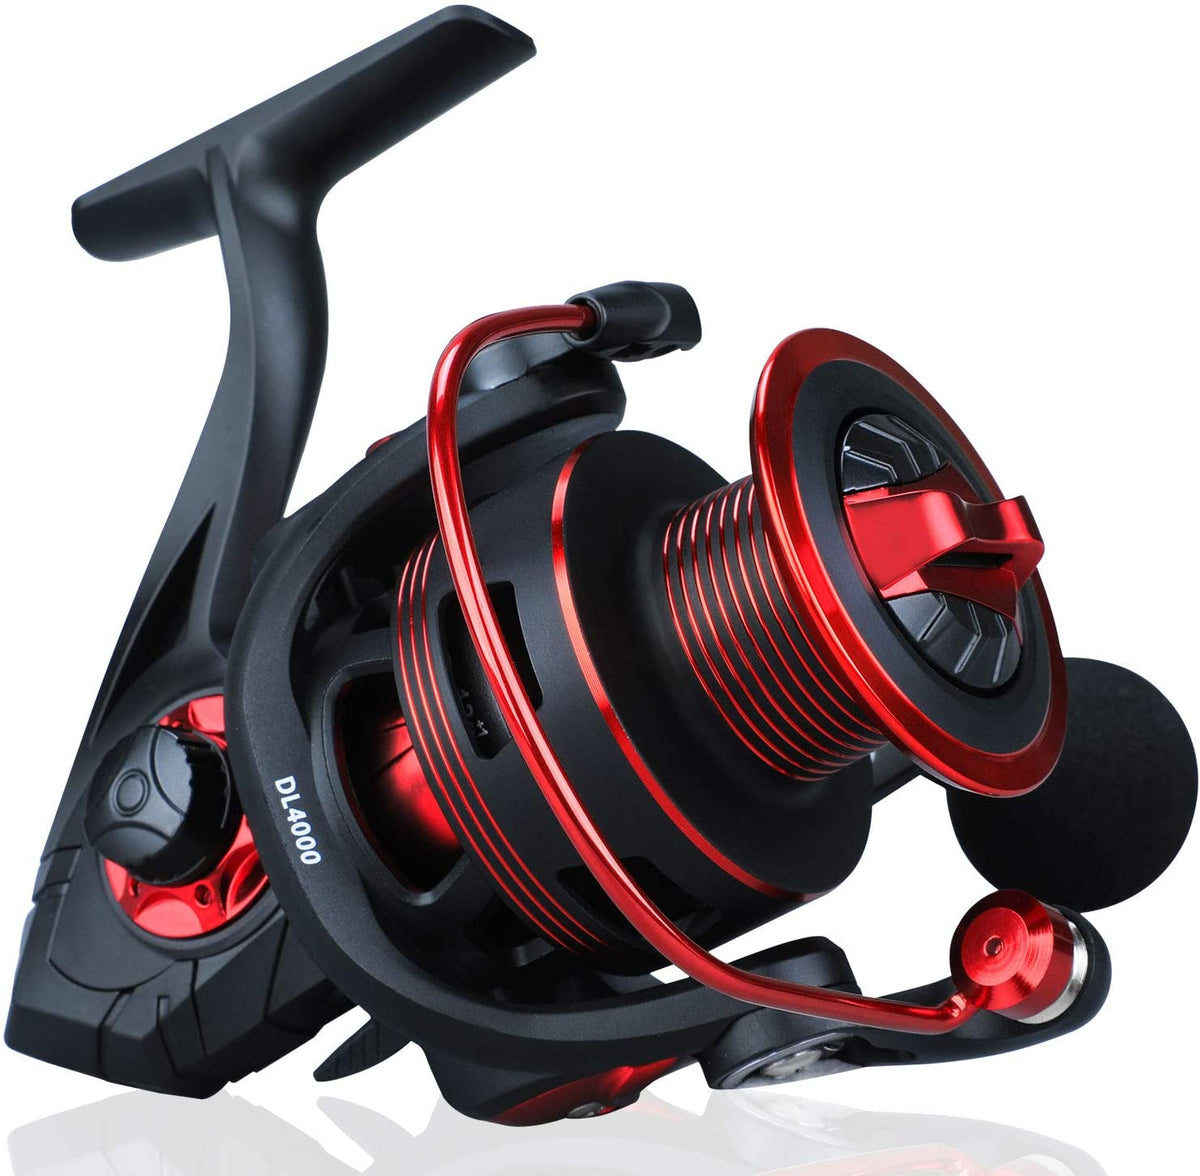 Bass Fishing Reels with Fish Bite Alarm Sound Max Drag 22lb Spinning Reel  Left Right Interchangeable for Saltwater Freshwater